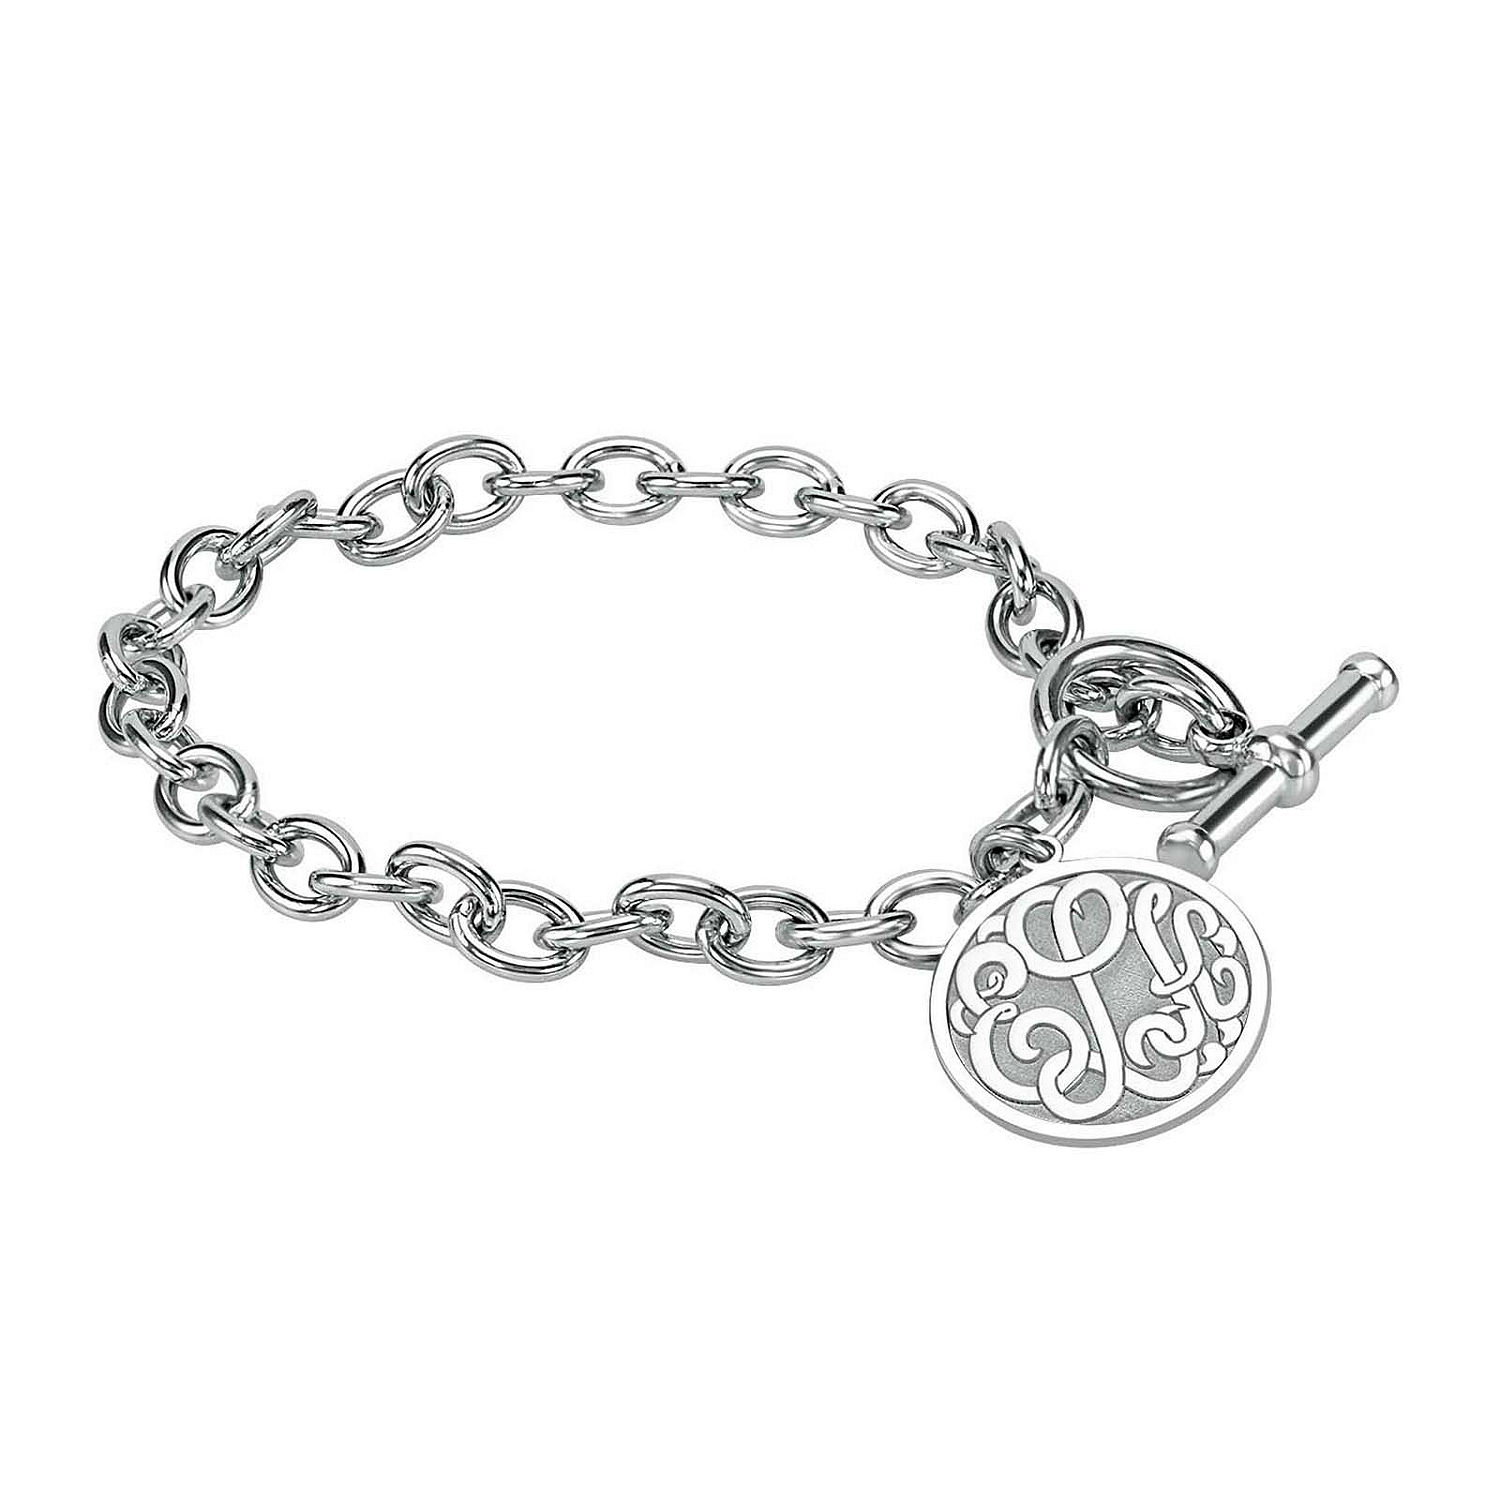 Personalized Sterling Silver 20mm Monogram Charm Bracelet - JCPenney